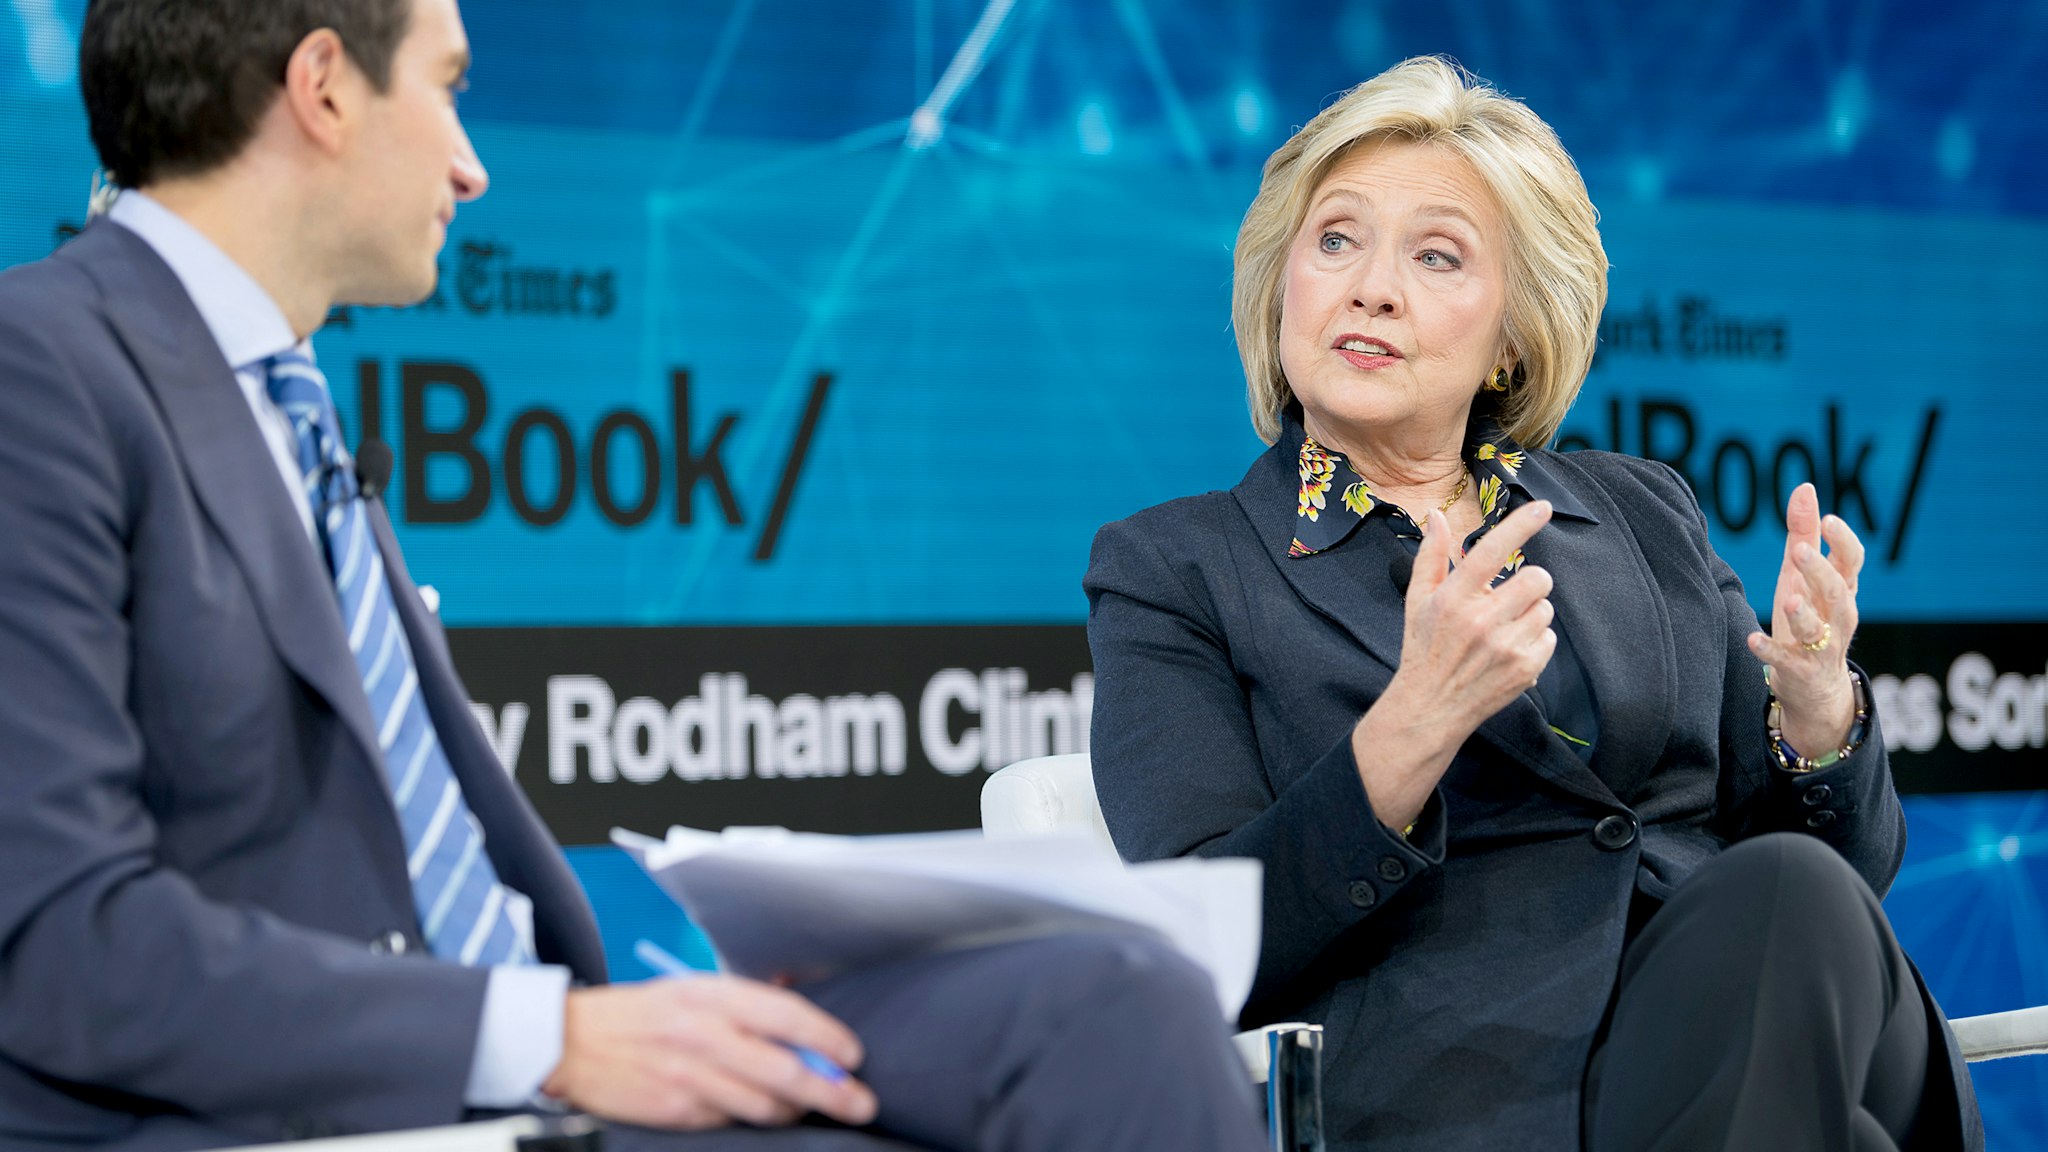 Andrew Ross Sorkin, Editor at Large, Columnist and Founder, DealBook, The New York Times speaks with Hillary Rodham Clinton, Former First Lady, U.S. Senator, U.S. Secretary of State onstage at 2019 New York Times Dealbook on November 06, 2019 in New York City. (Photo by Michael Cohen/Getty Images for The New York Times)